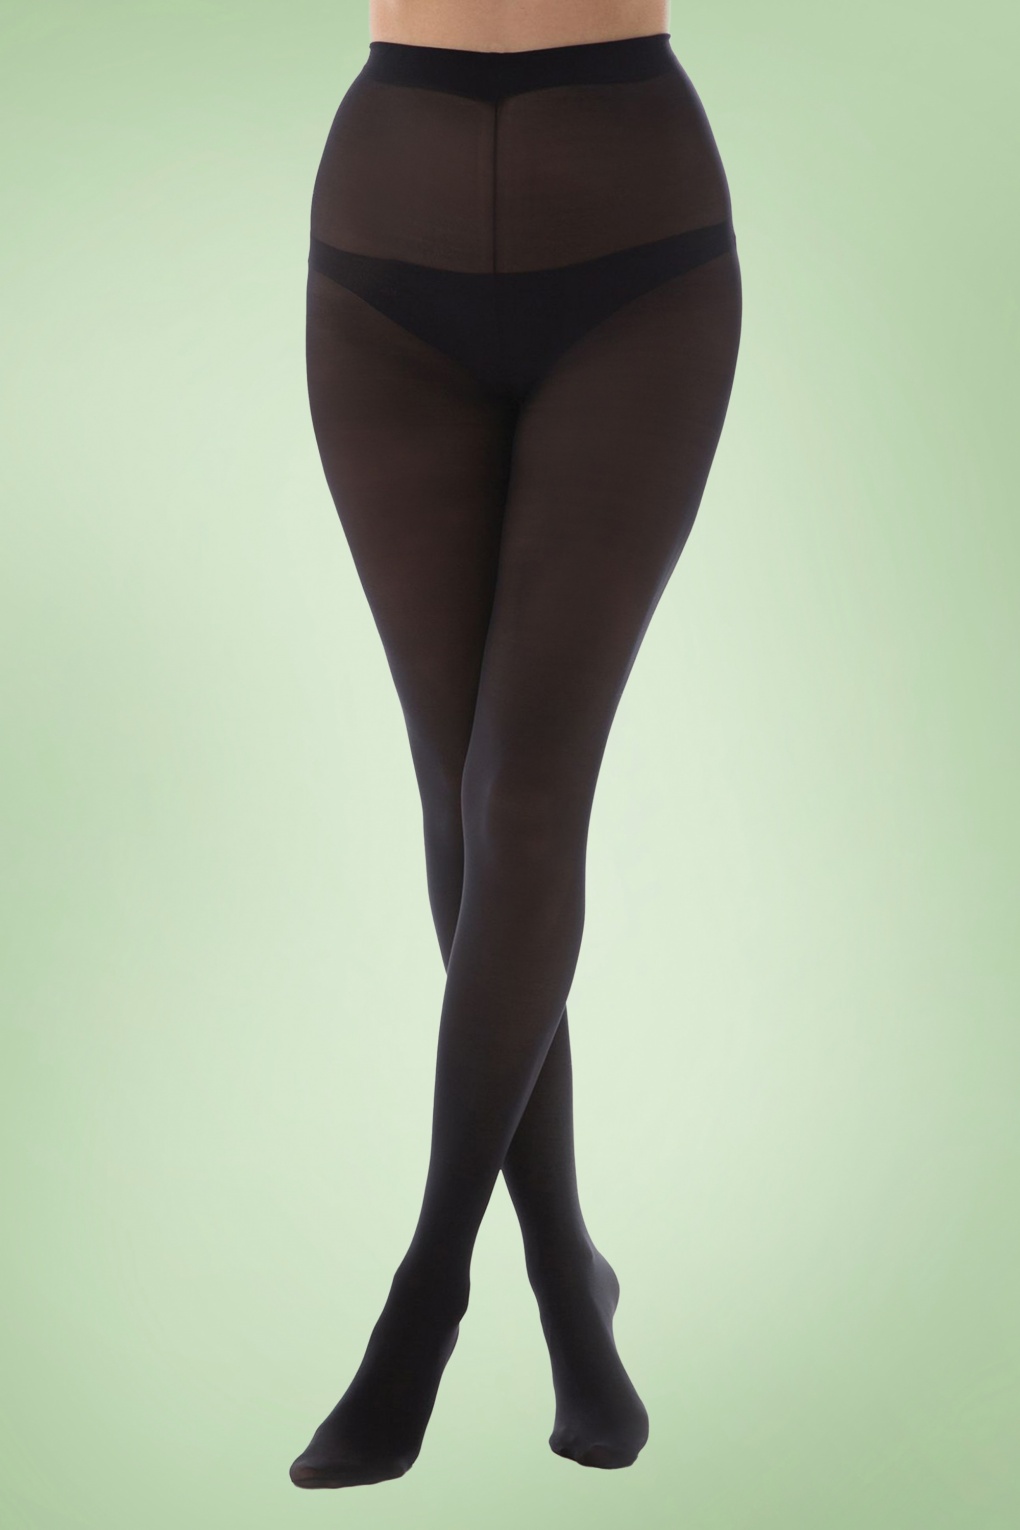 Recycled Yarn Tights in Black